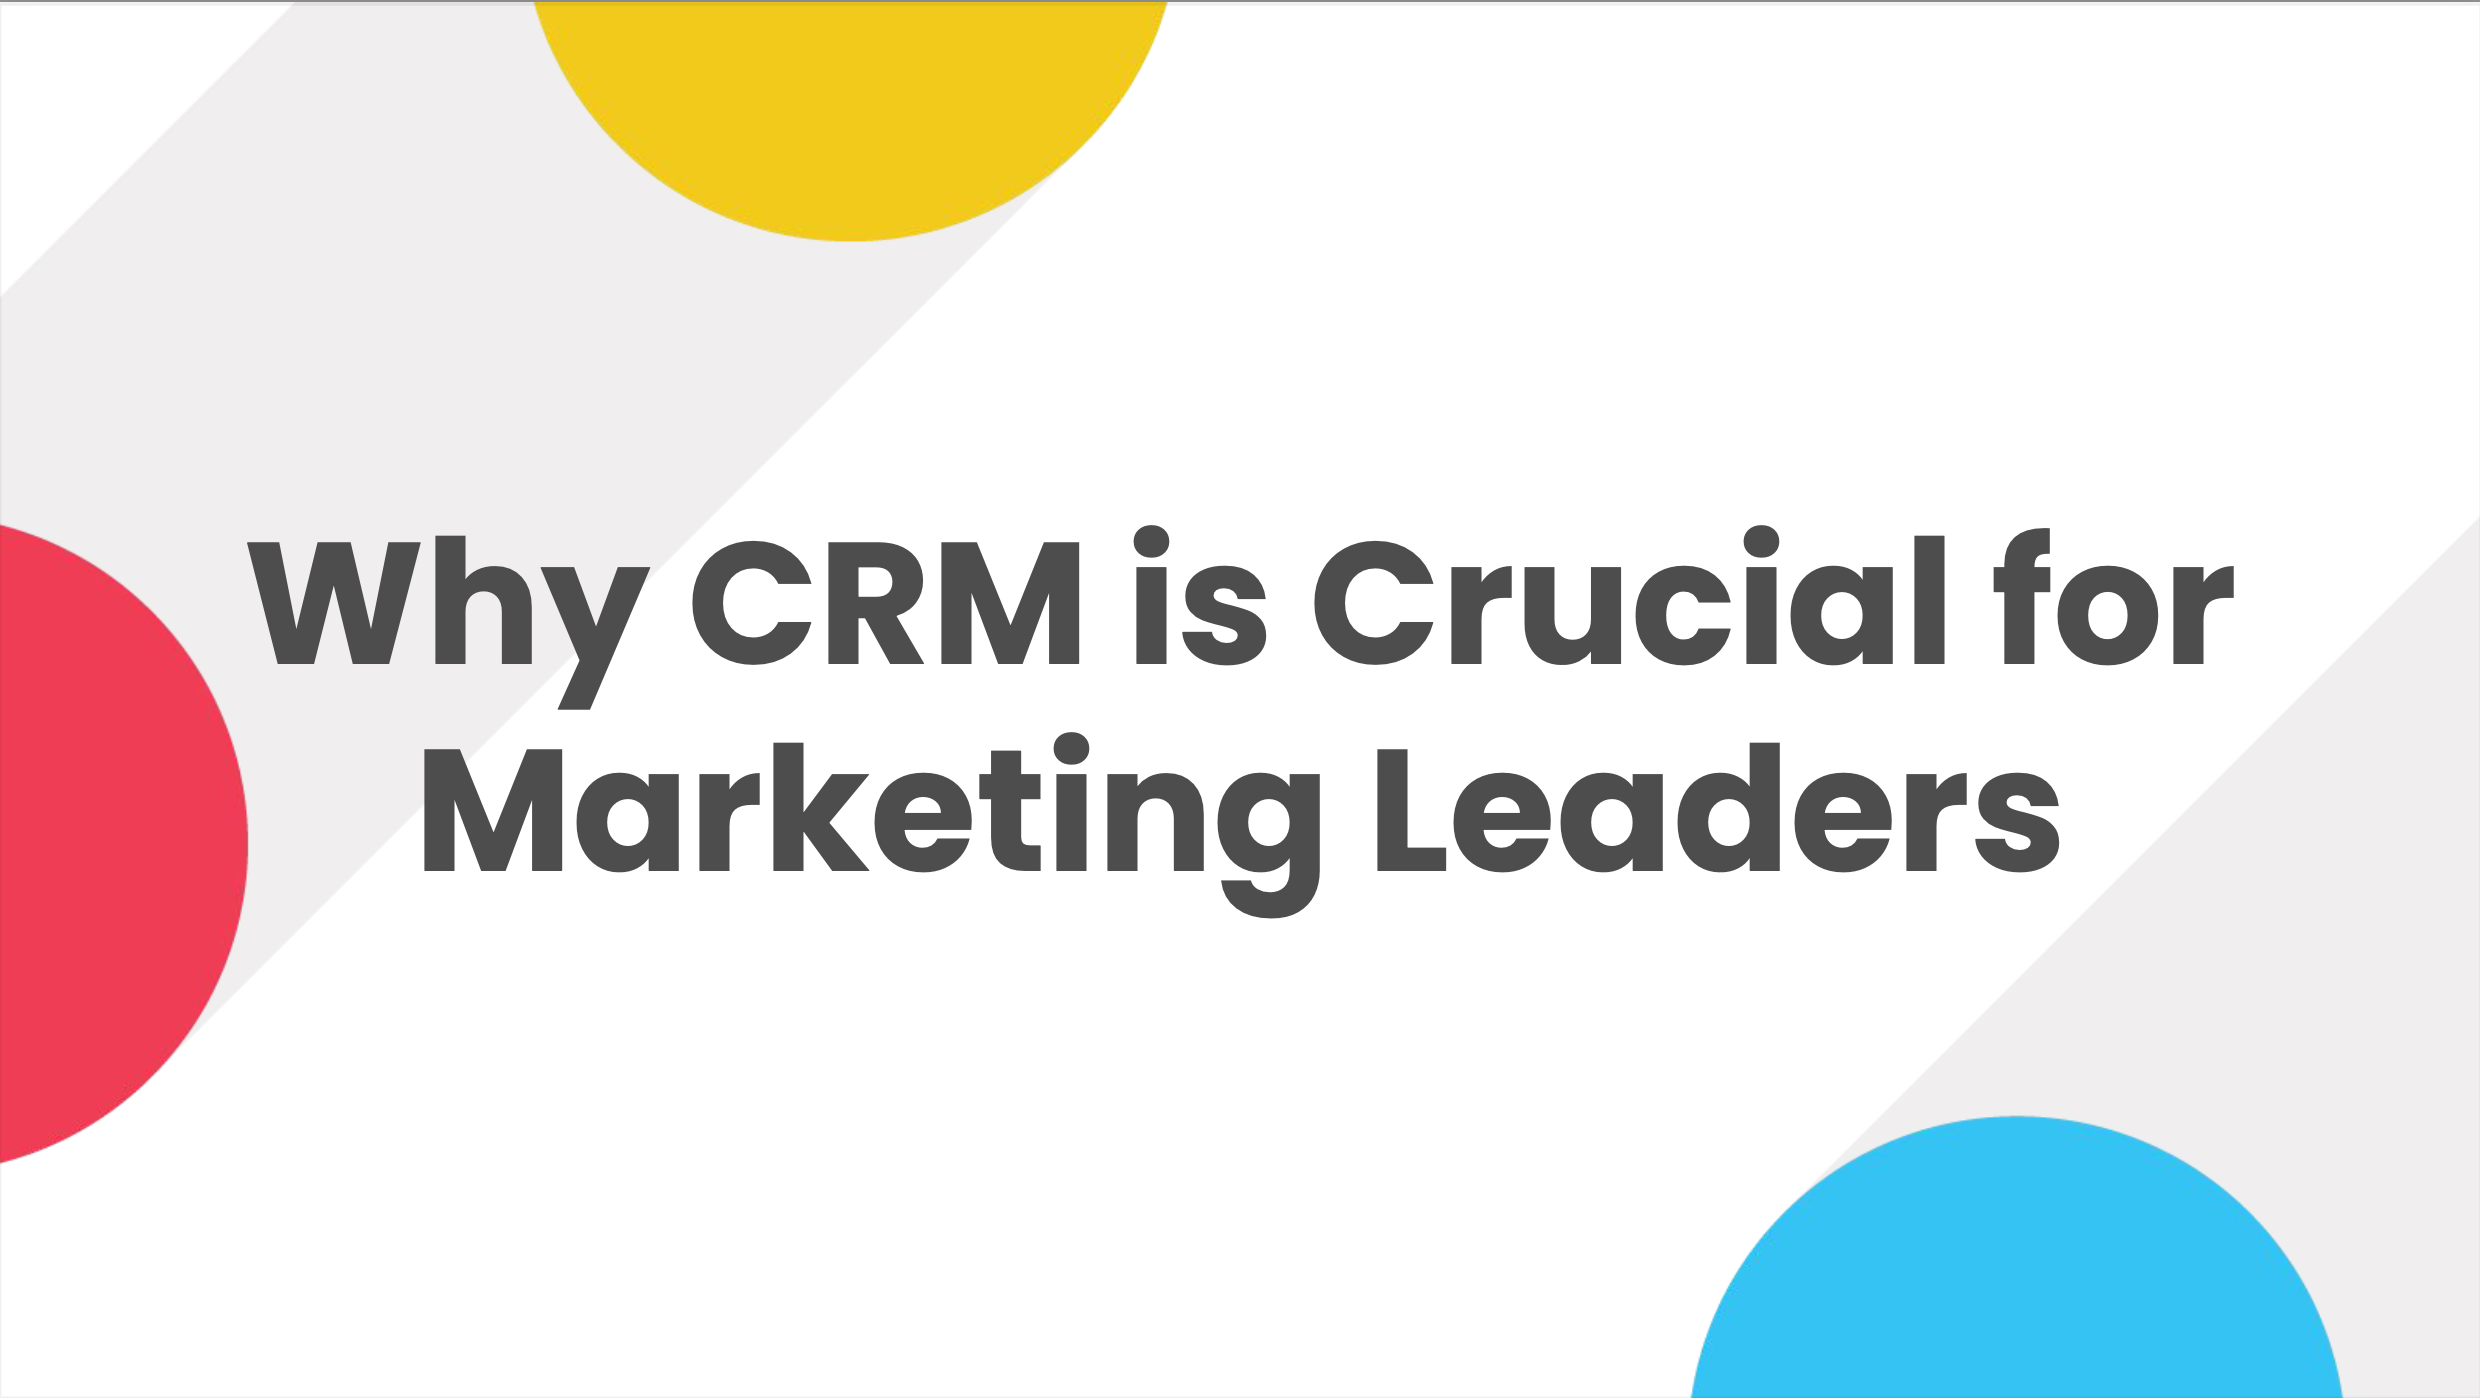 Why CRM is Crucial for Marketing Leaders